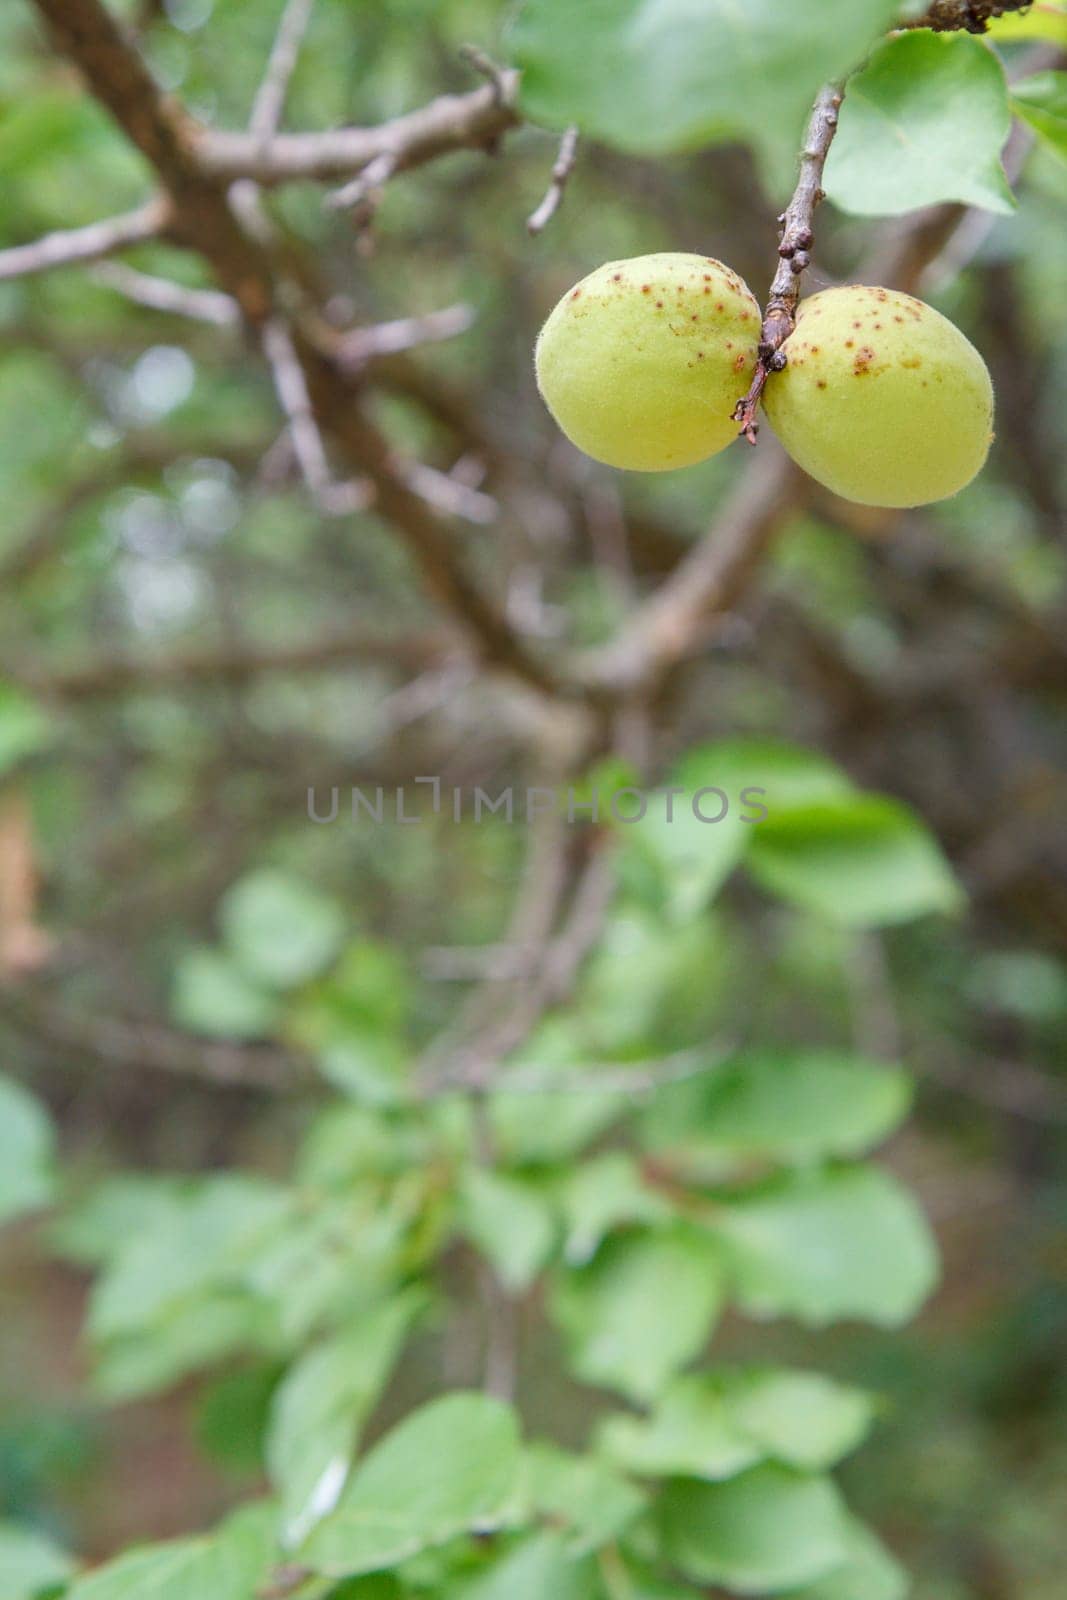 Close-up view of green unripe apricots on a tree with an orchard on the blurred background.